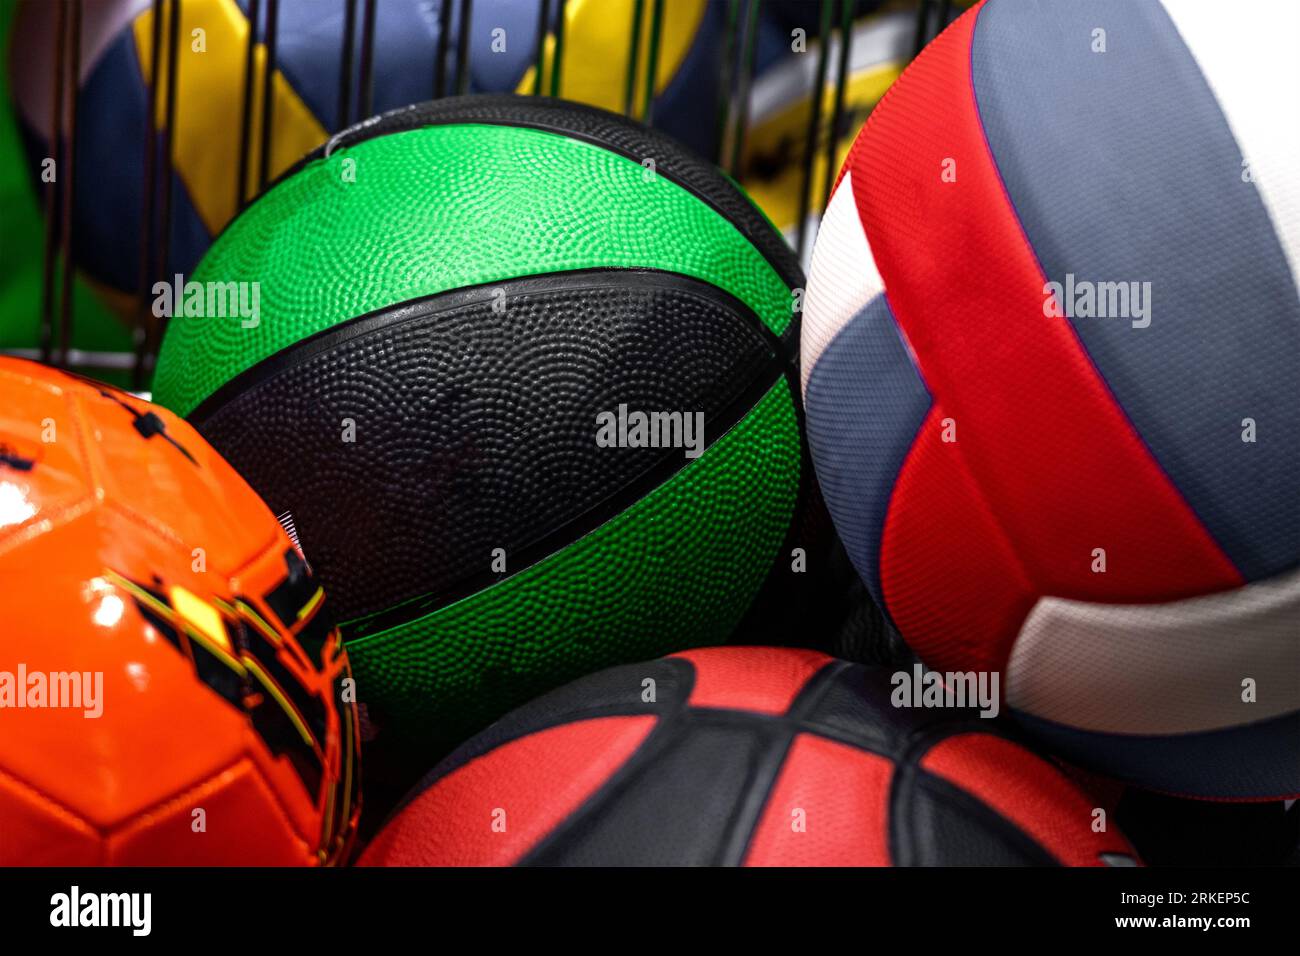 Set of different game balls like basketball, and soccer ball in shopping cart. Concept of sport team playing games Stock Photo